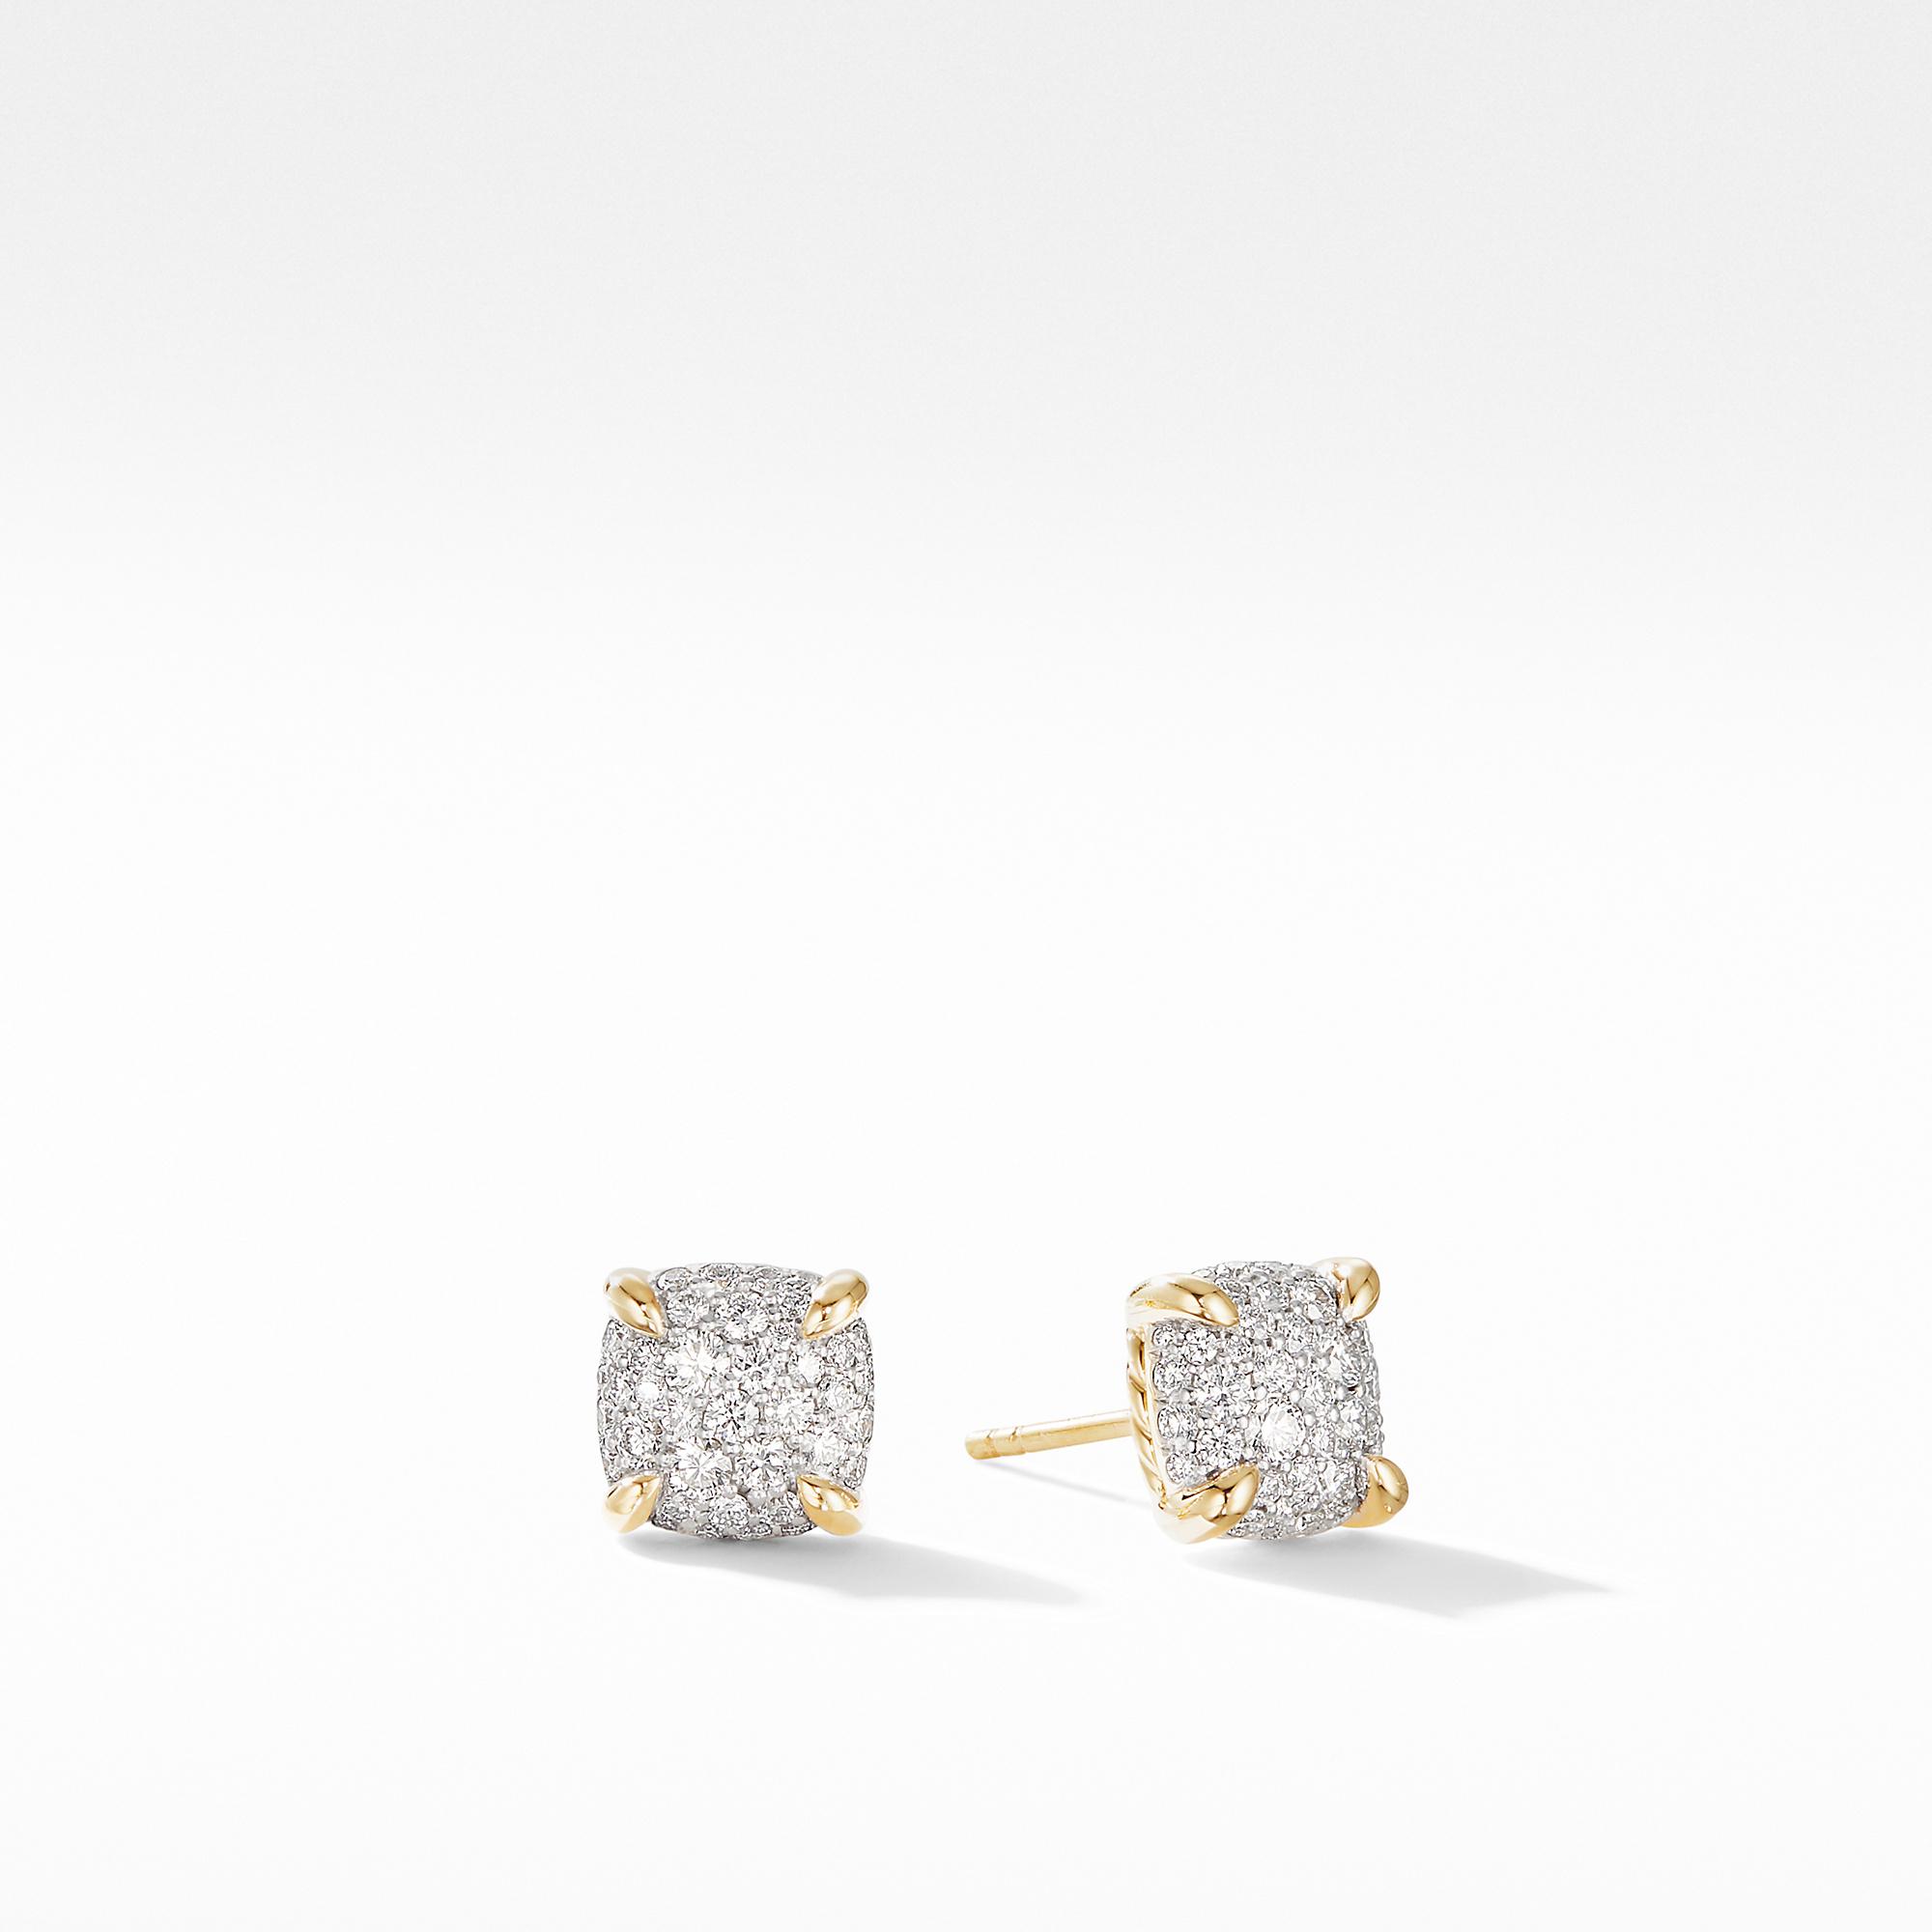 David Yurman Chatelaine Stud Earrings in 18k Yellow Gold with Full Pave Diamonds